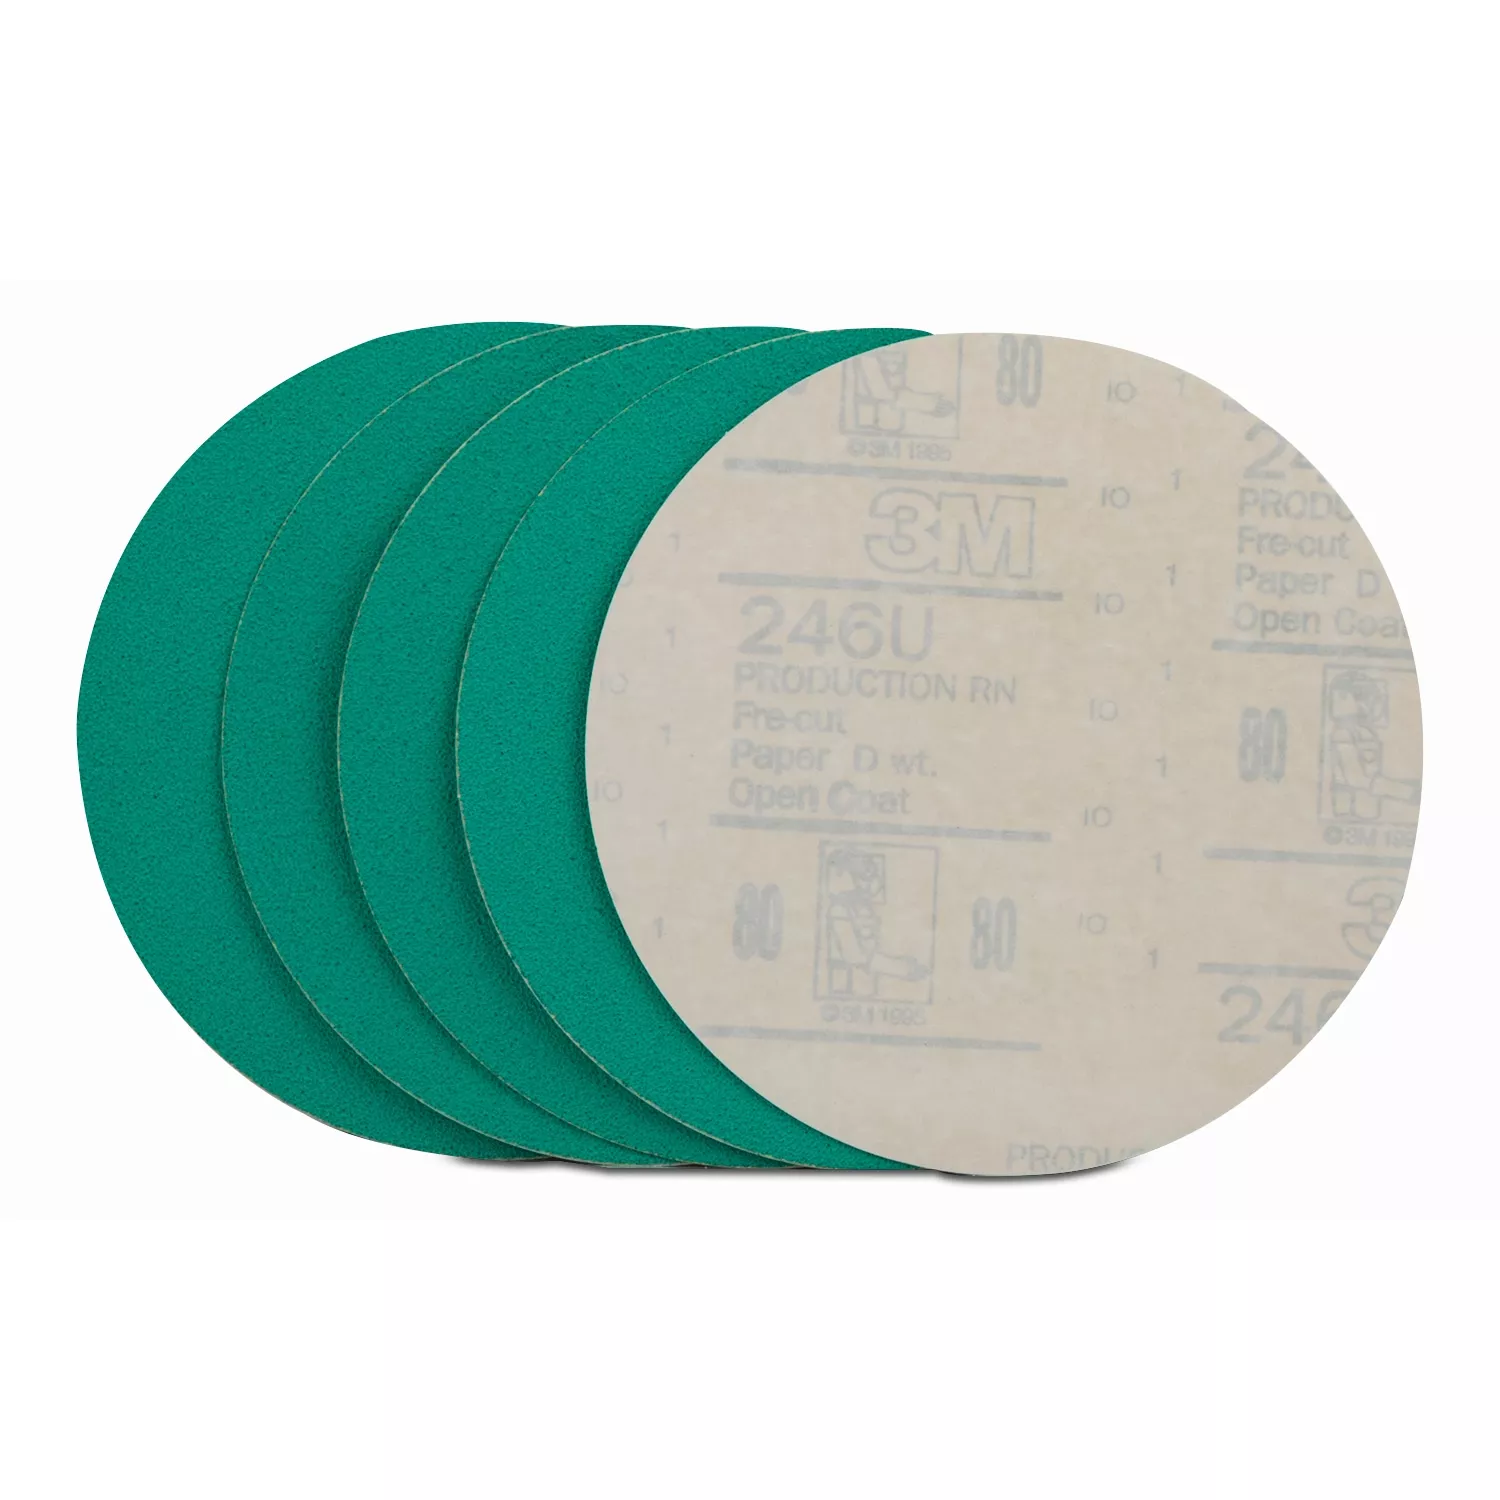 SKU 7010308857 | 3M™ Green Corps™ Sanding Disc with Stikit™ Attachment